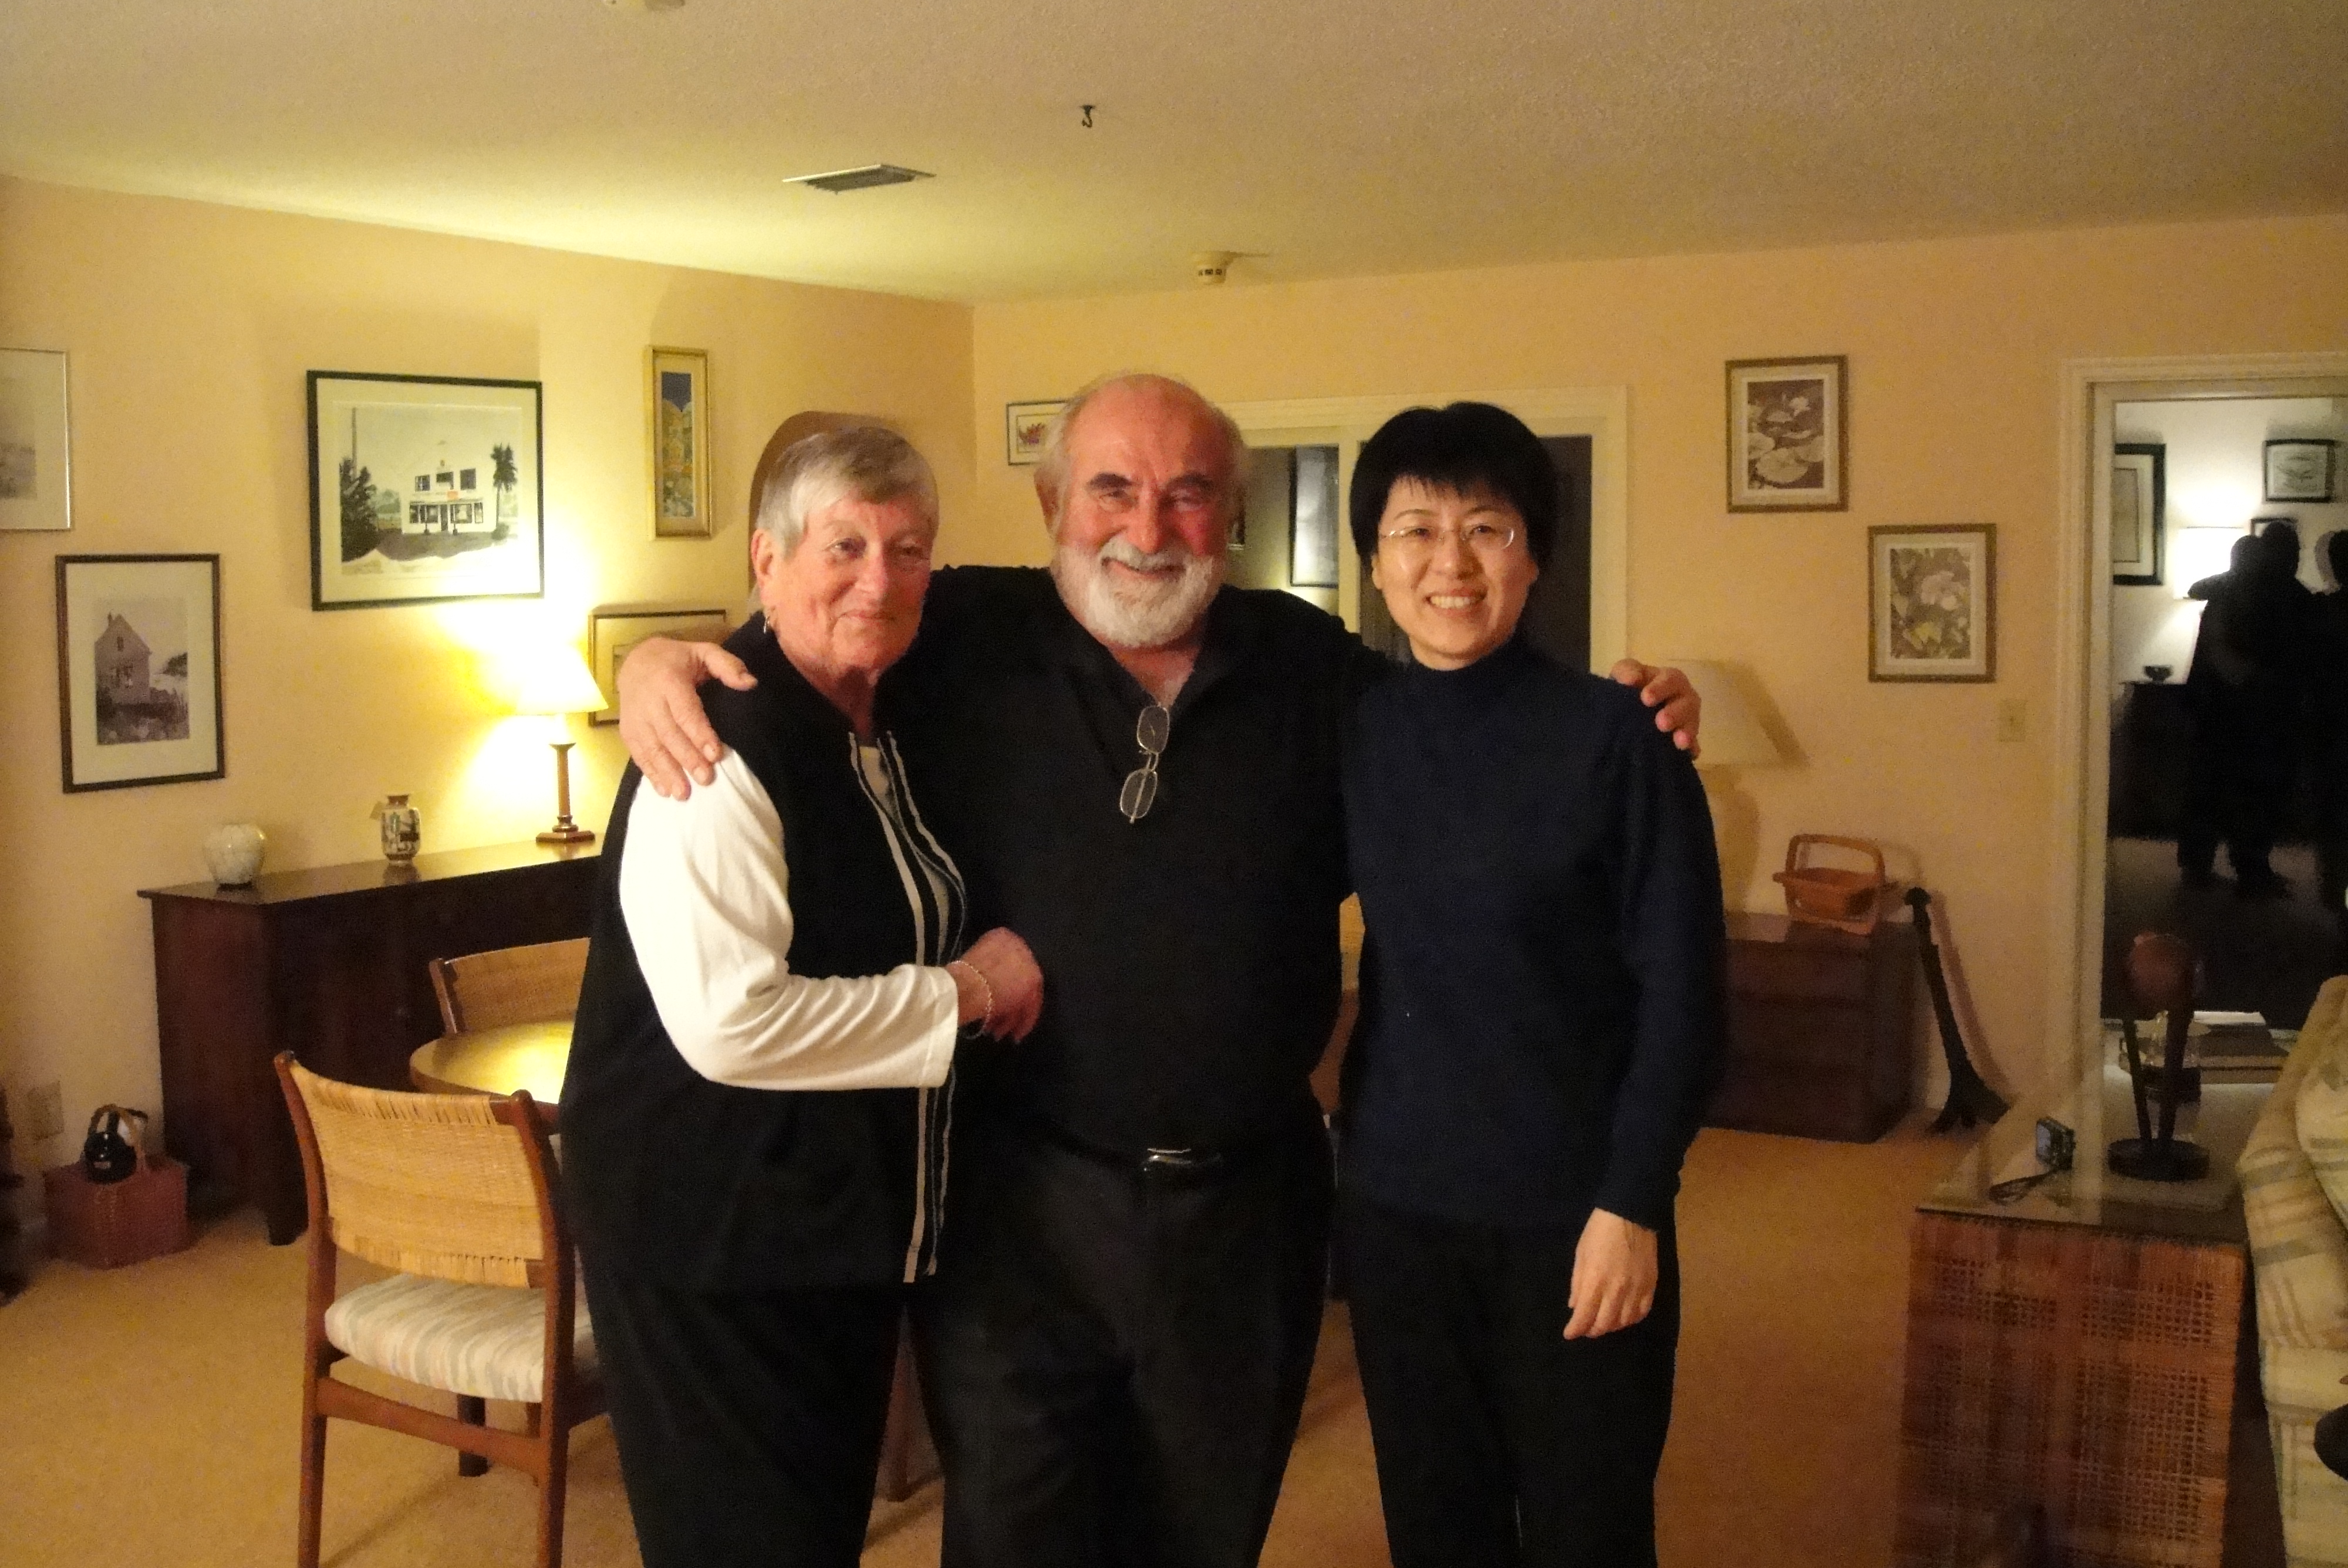 Photo where Jianhua Zhao was at Stephan’s house, taken in 2010